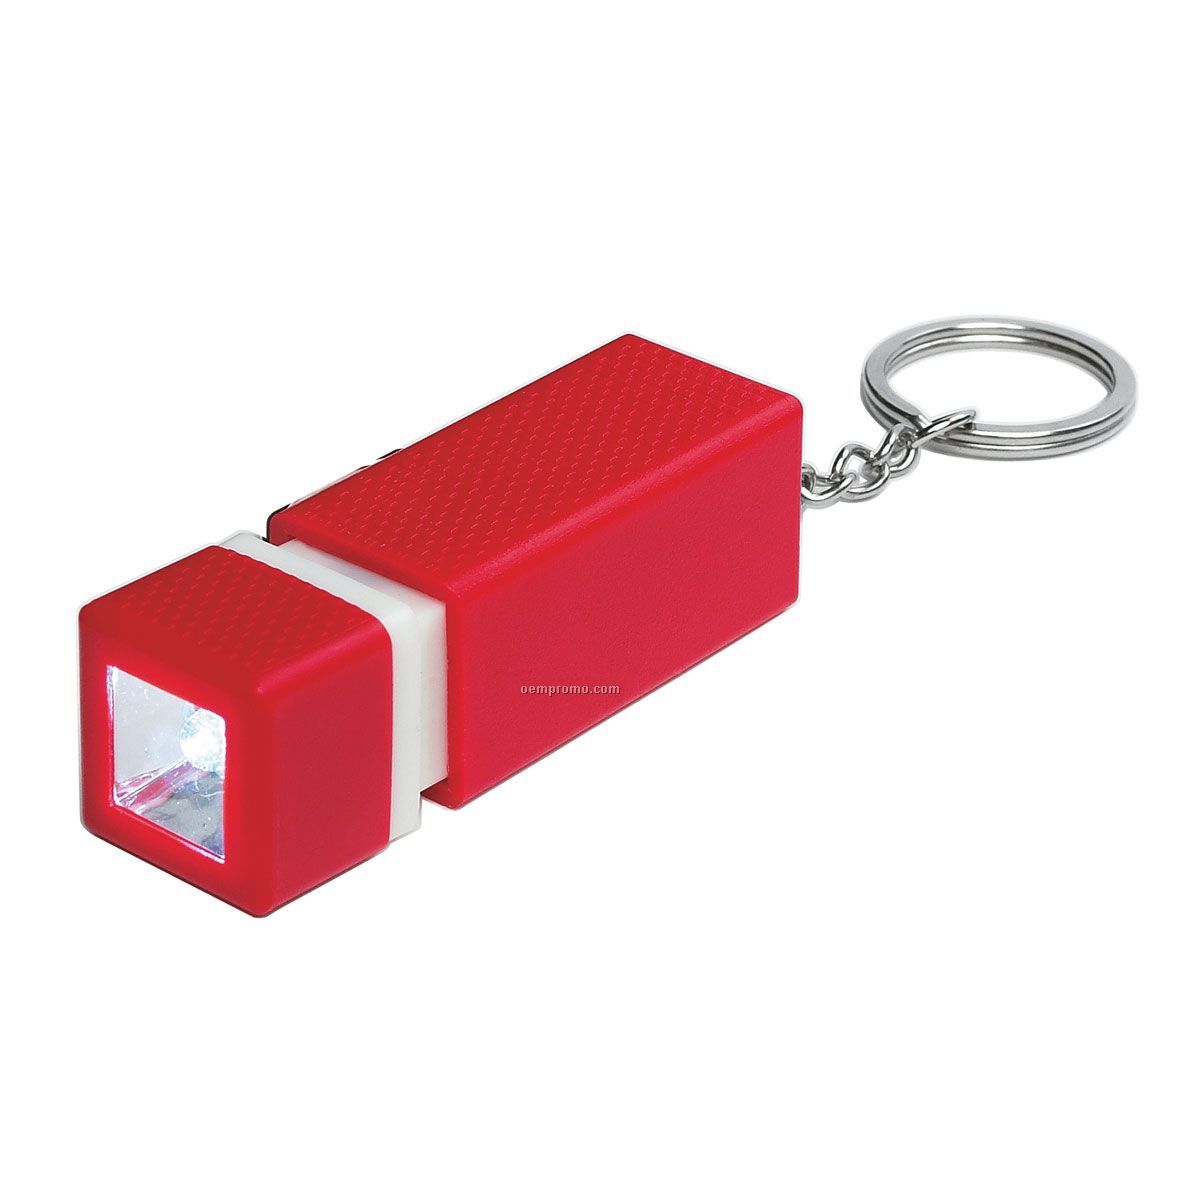 Square Pull Out Flashlight Keychain - Red